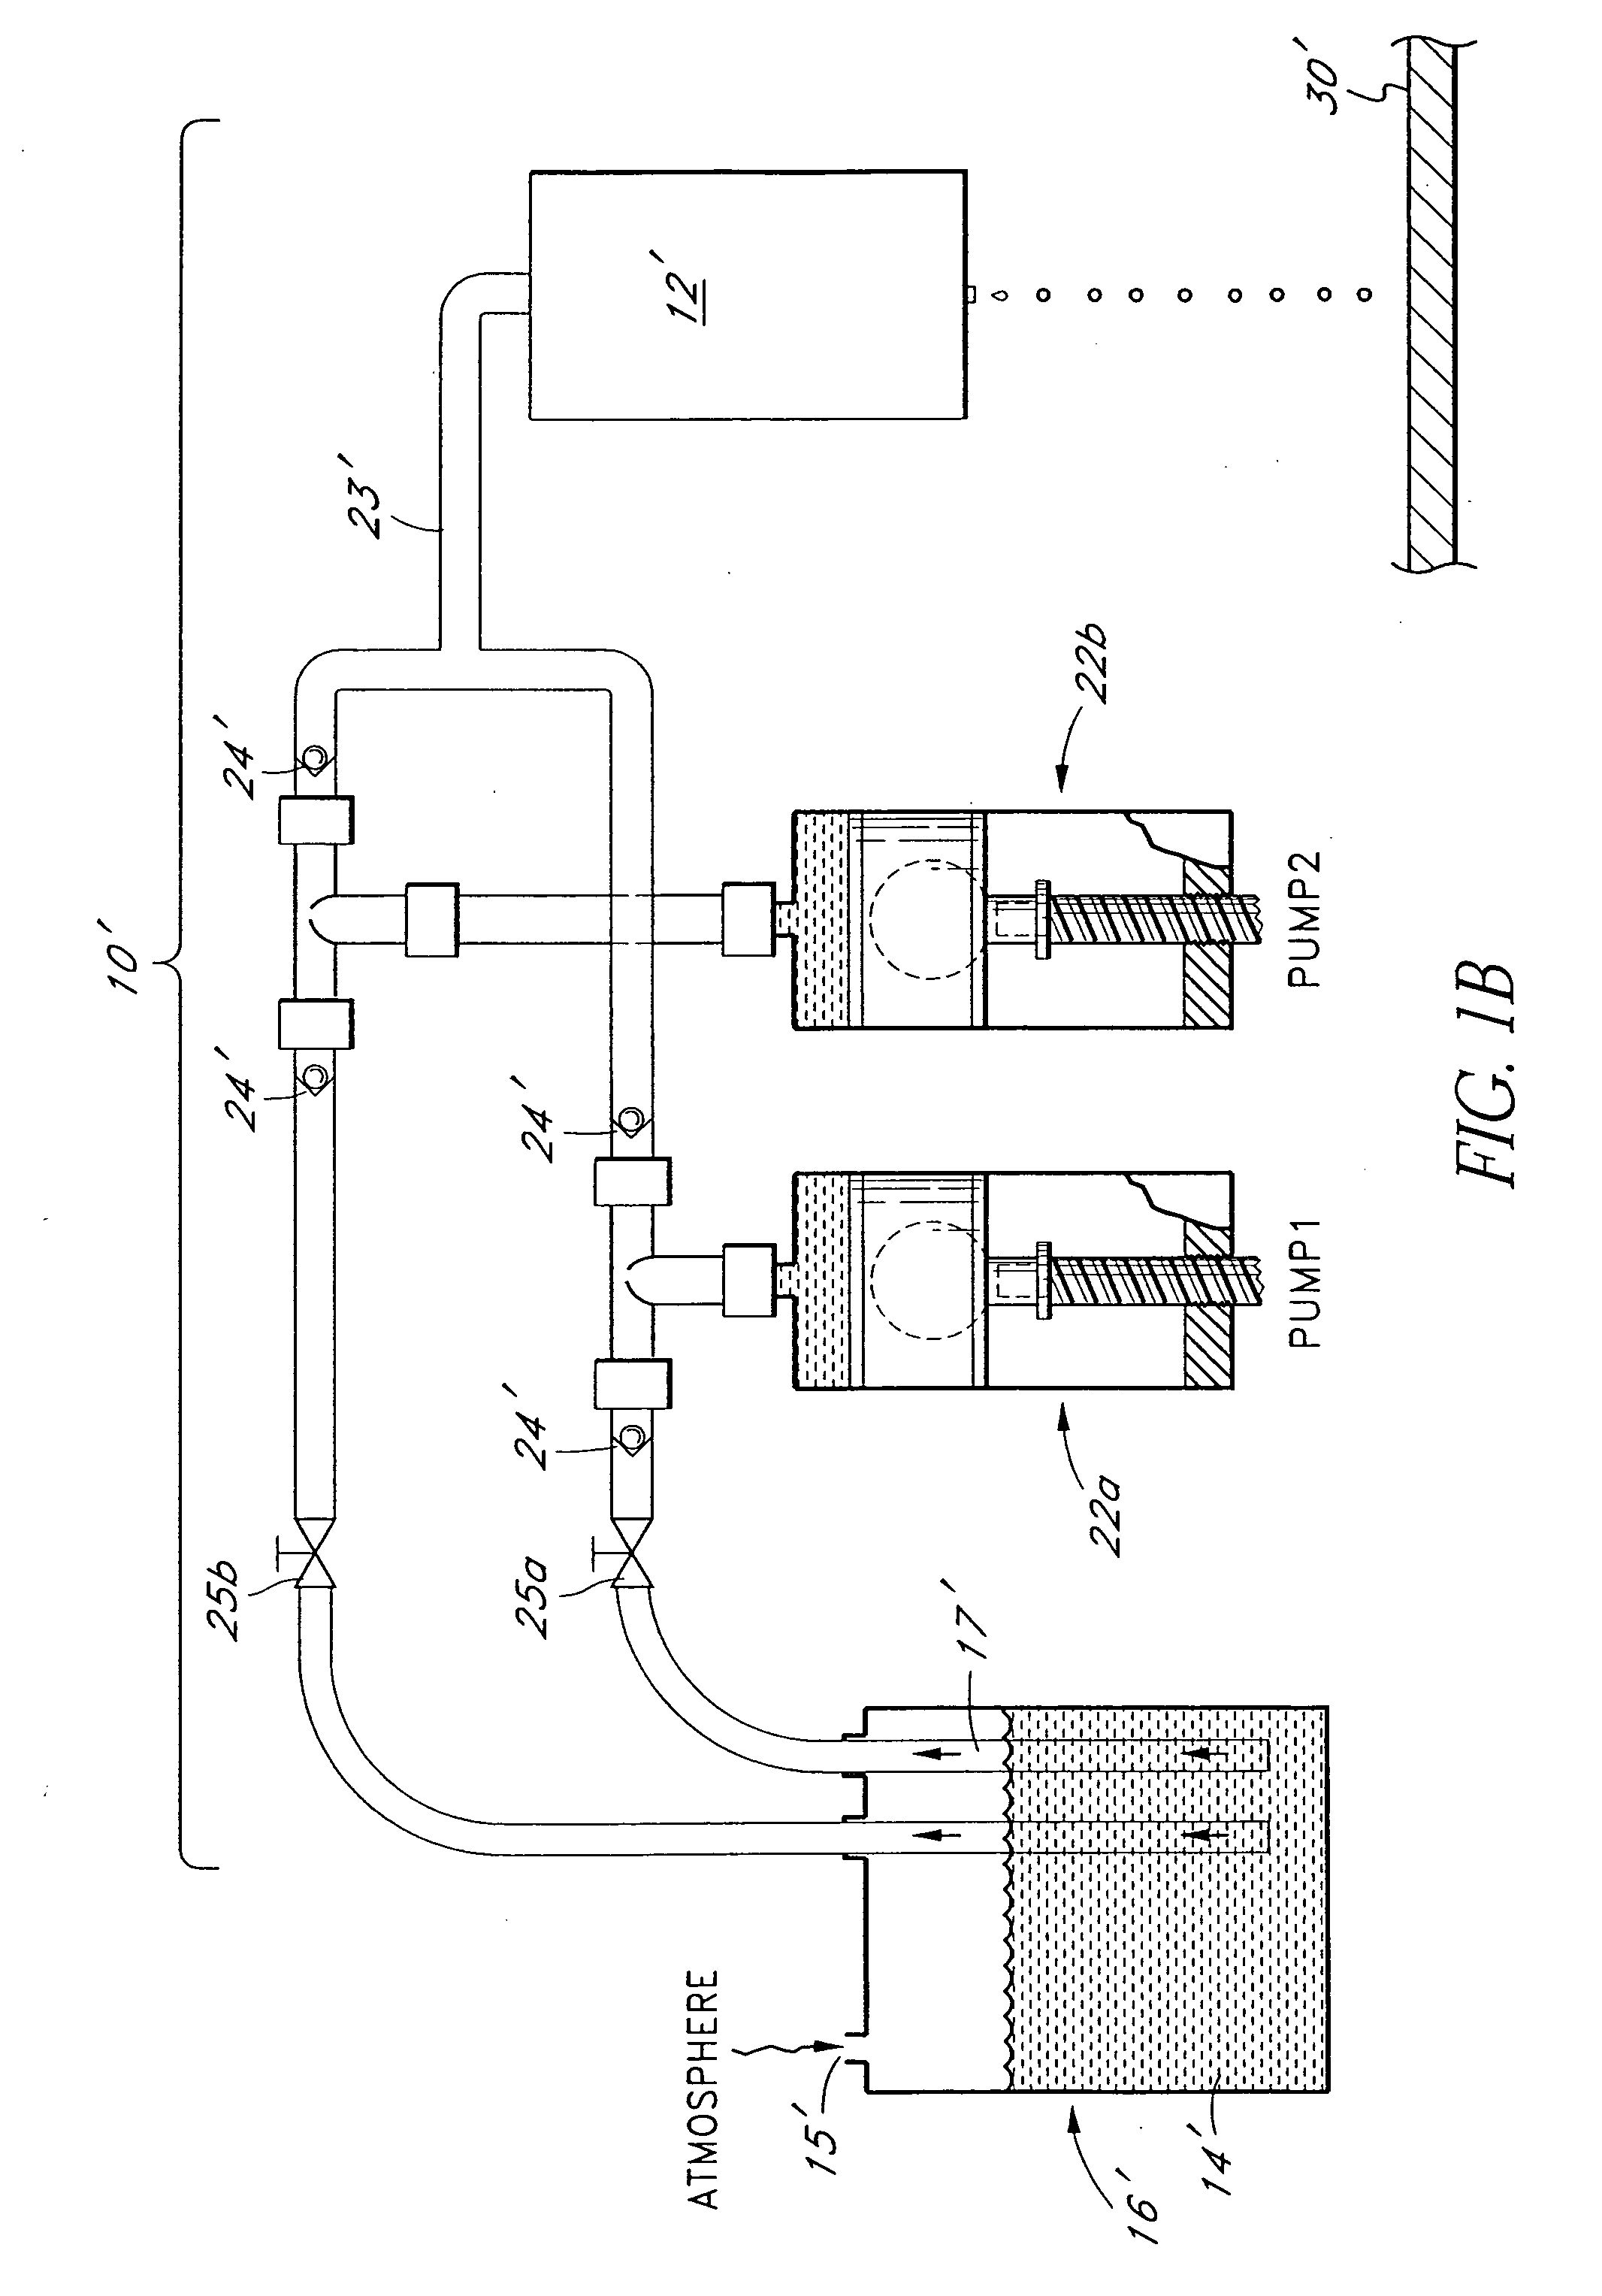 Method for dispensing reagent onto a substrate